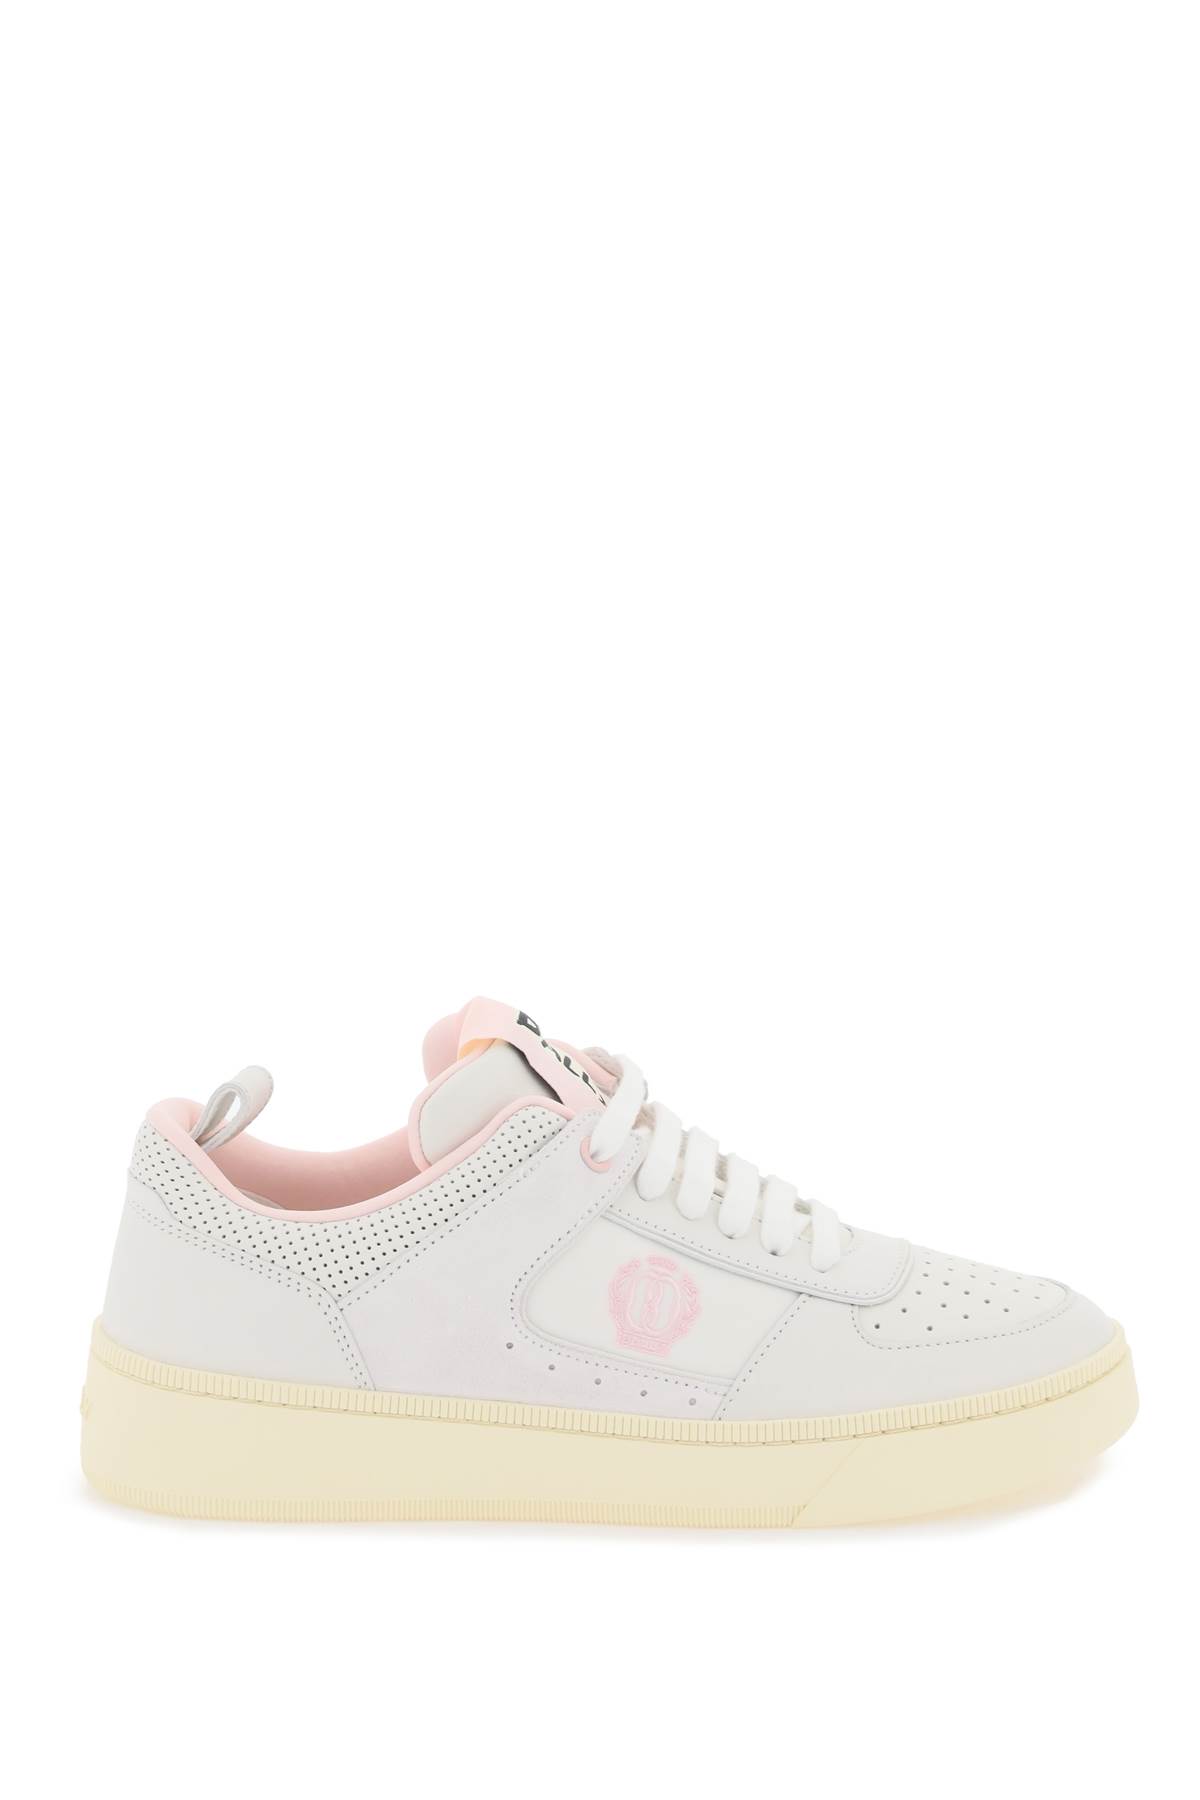 Shop Bally Leather Riweira Sneakers In White Rosa (white)